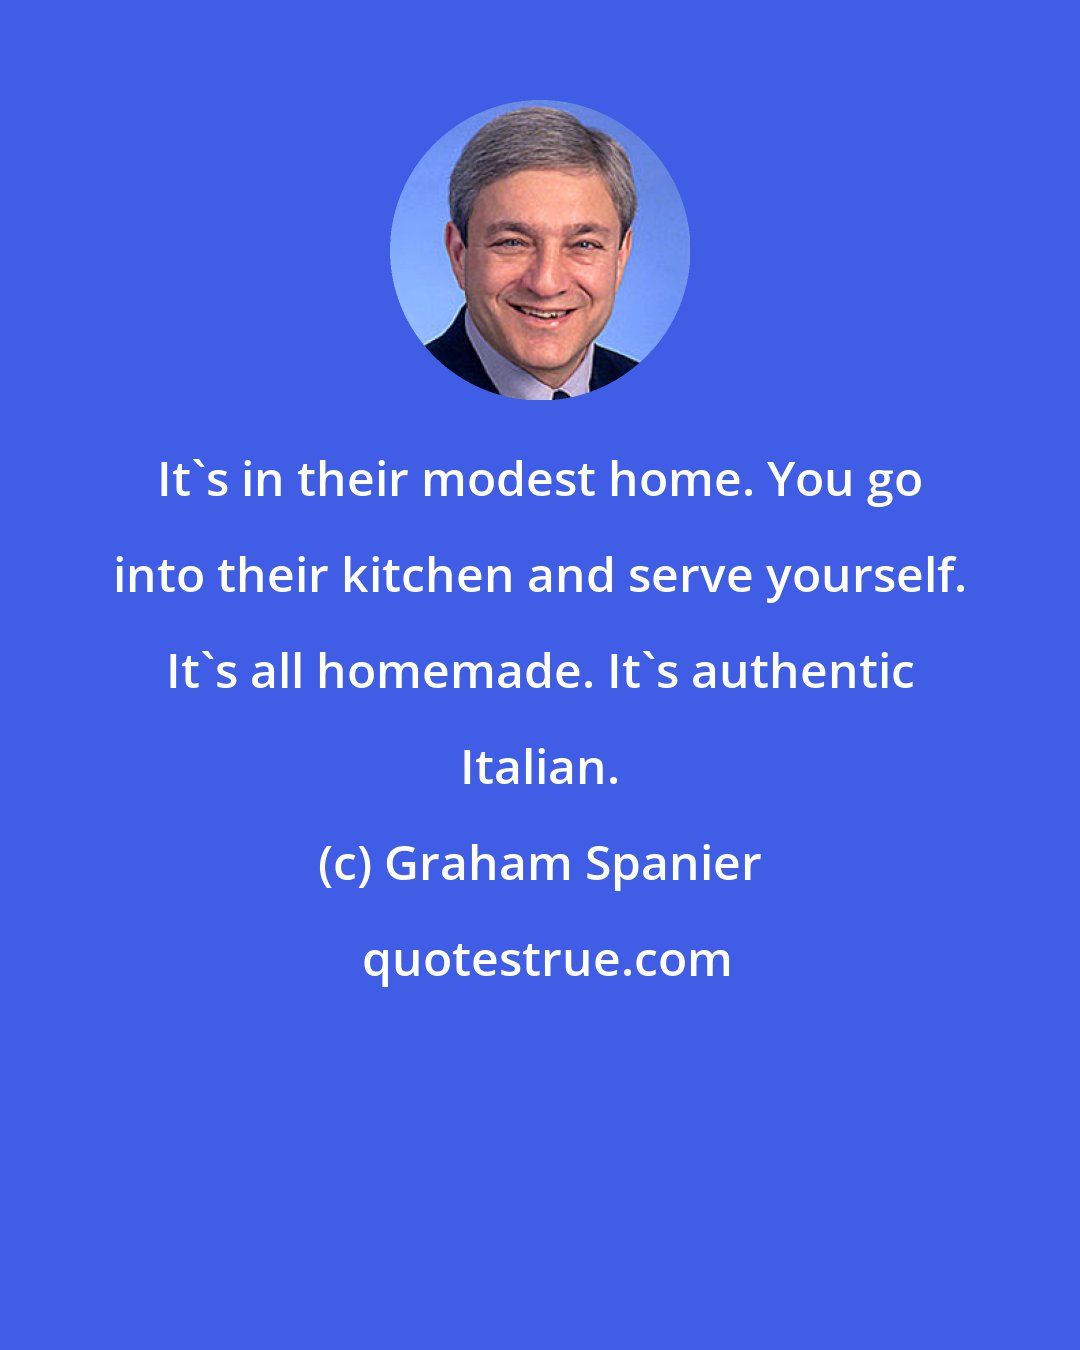 Graham Spanier: It's in their modest home. You go into their kitchen and serve yourself. It's all homemade. It's authentic Italian.